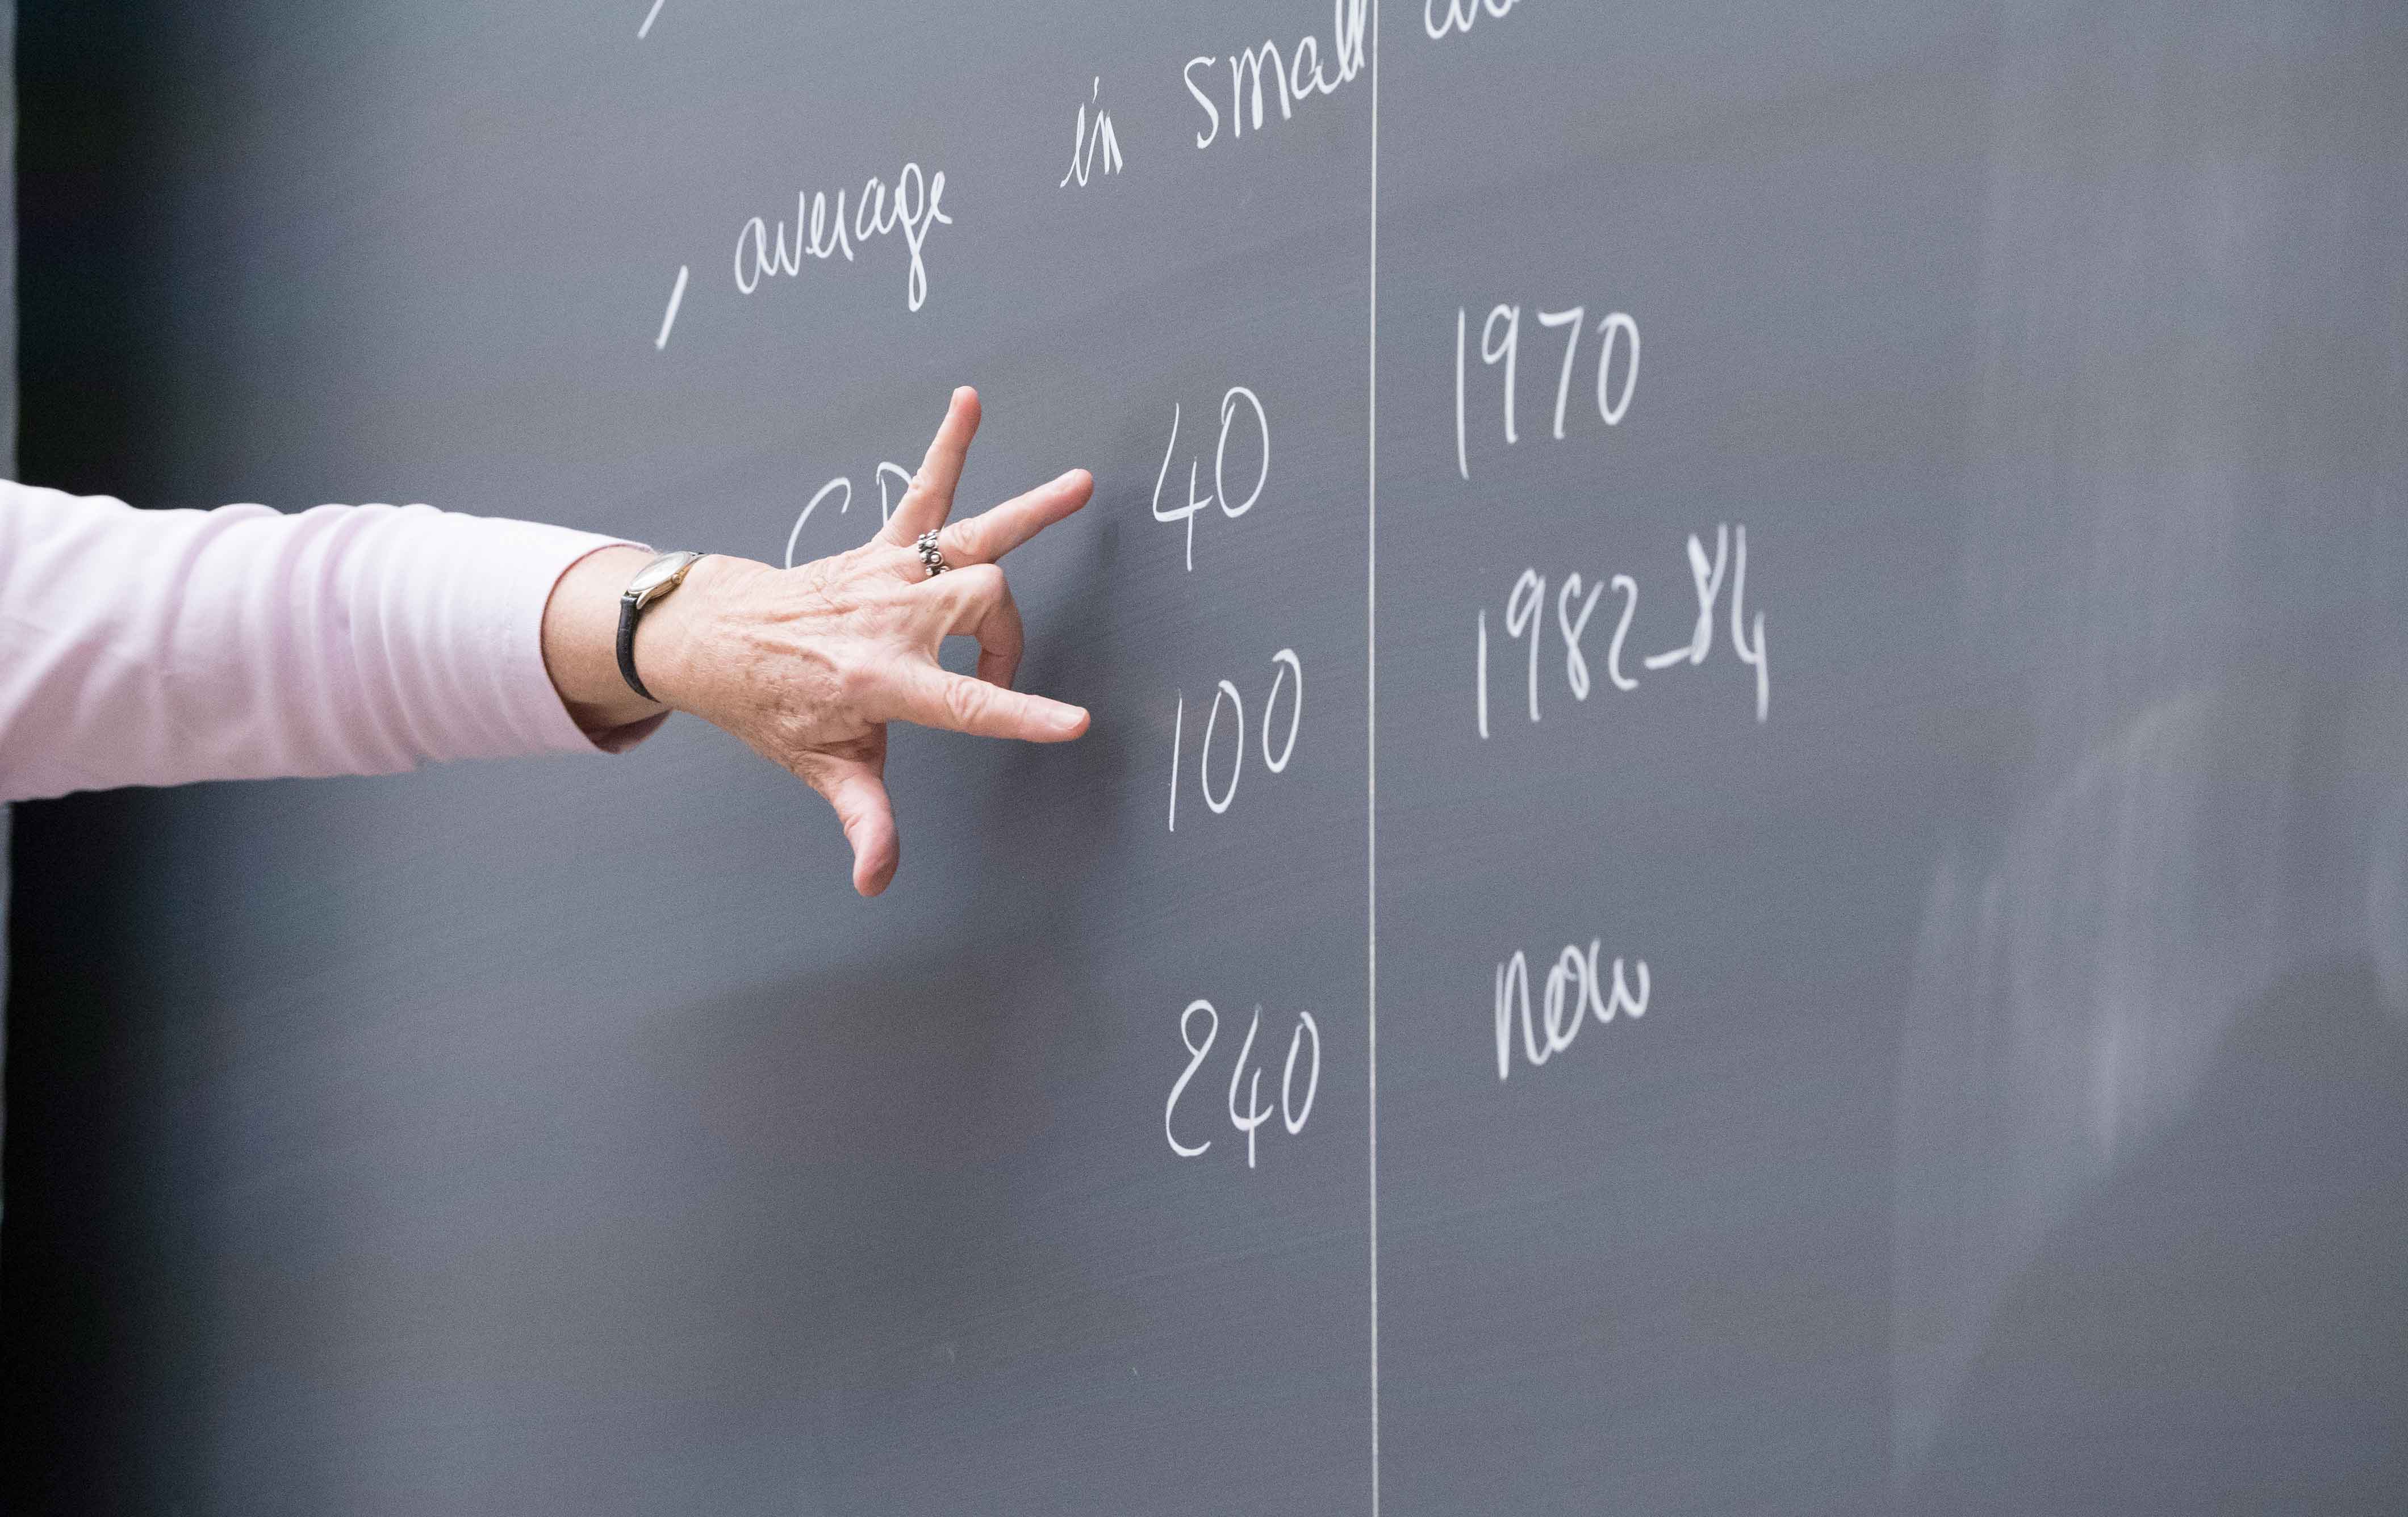 A hand gestures at a blackboard